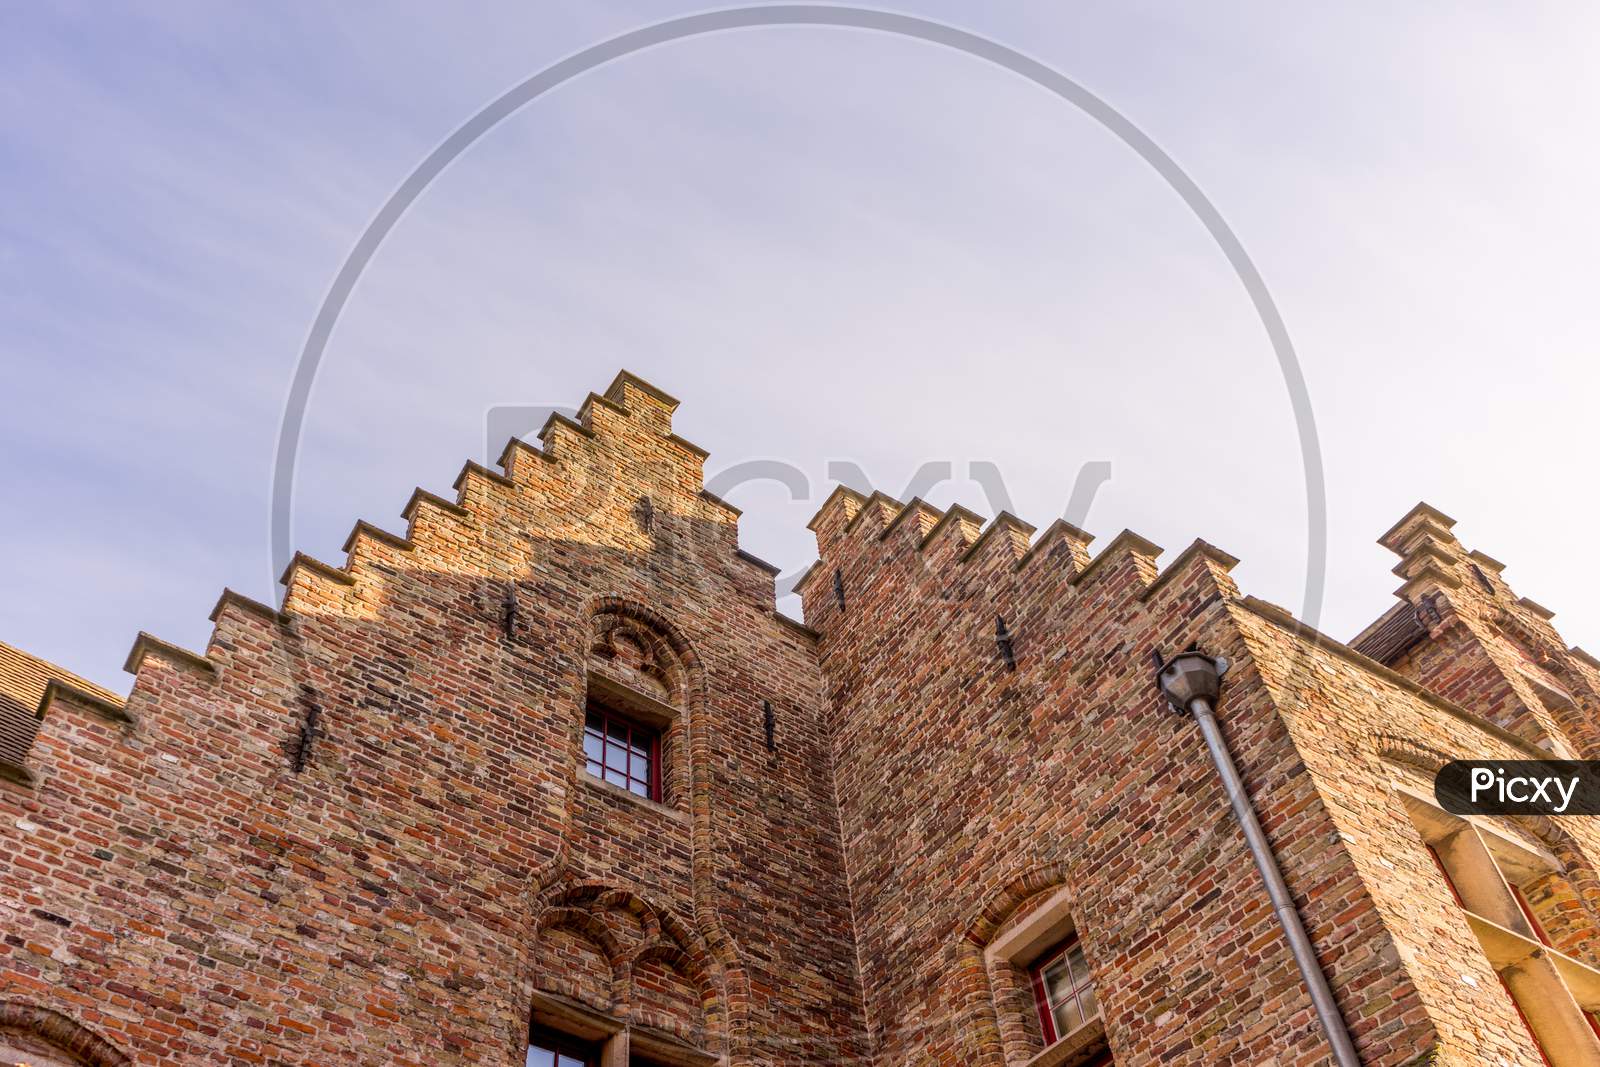 Belgium, Bruges, A Gable On Top Of Large Brick Building